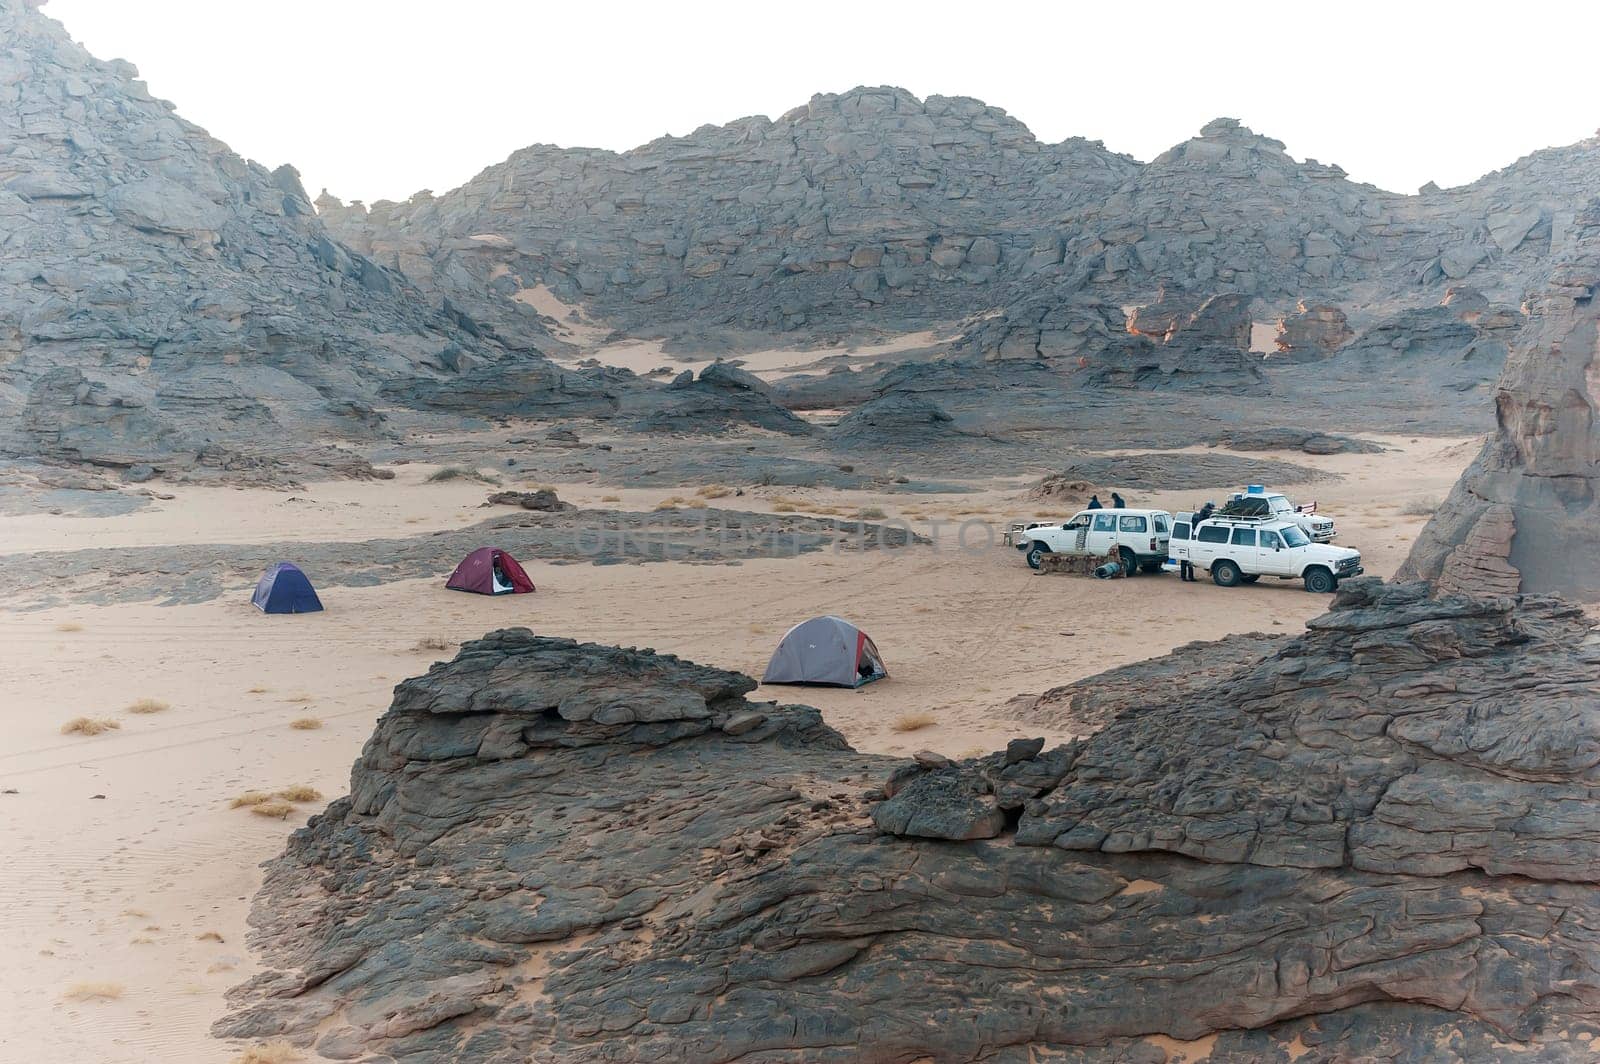 Camping in the Sahara by Giamplume